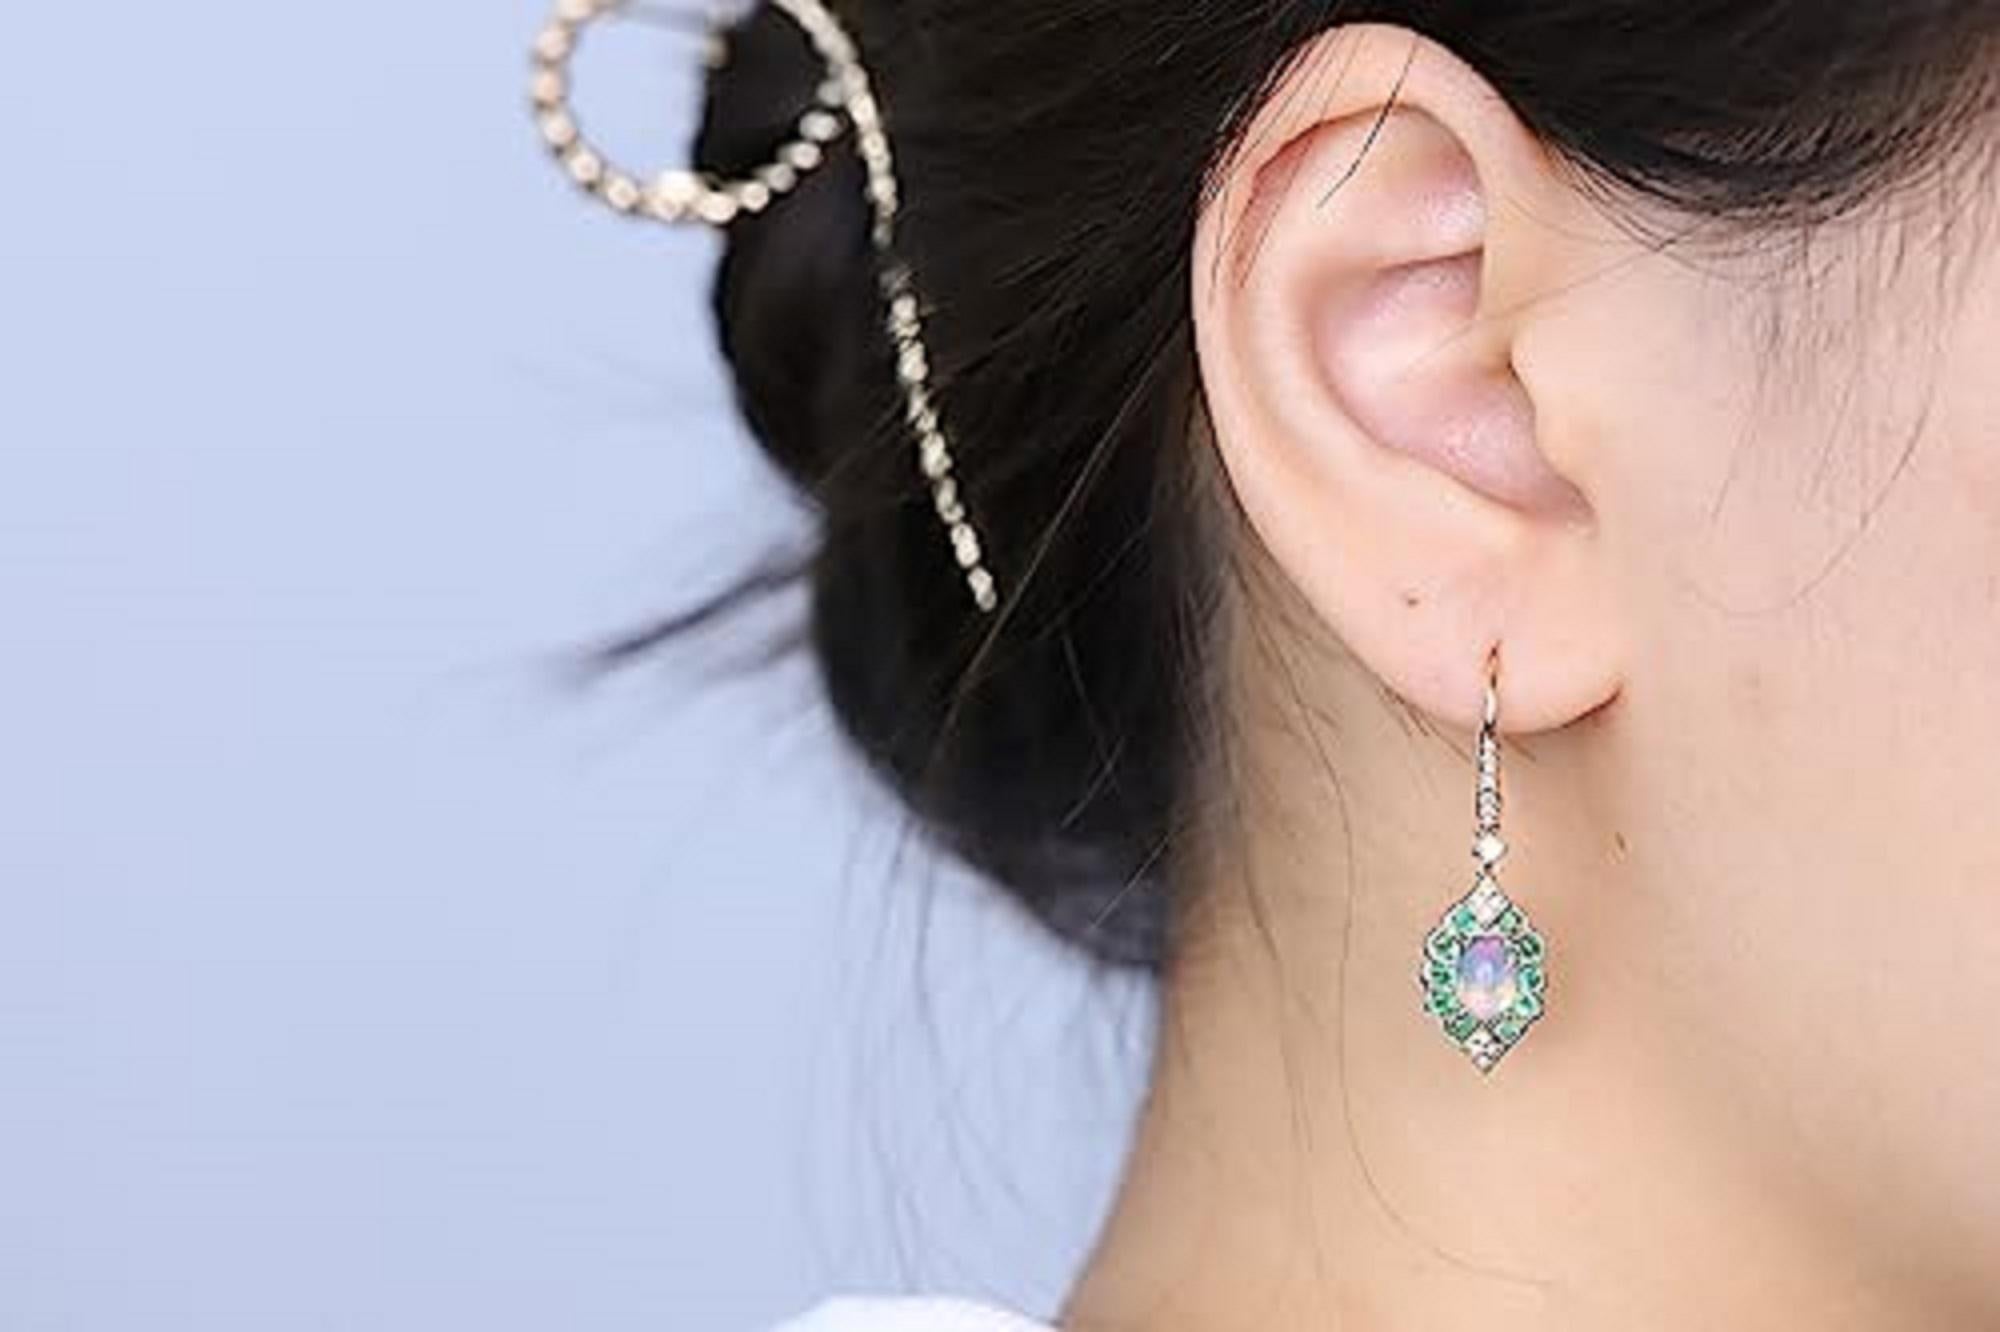 Decorate yourself in elegance with this Earring is crafted from 14-karat Yellow Gold by Gin & Grace. This Earring is made up of 5*7 Cushion-cut Ethiopian opal (2 Pcs) 1.30 carat, 2.0 round-cut Emerald (20 pcs) 0.61 grams and Round-cut White Diamond